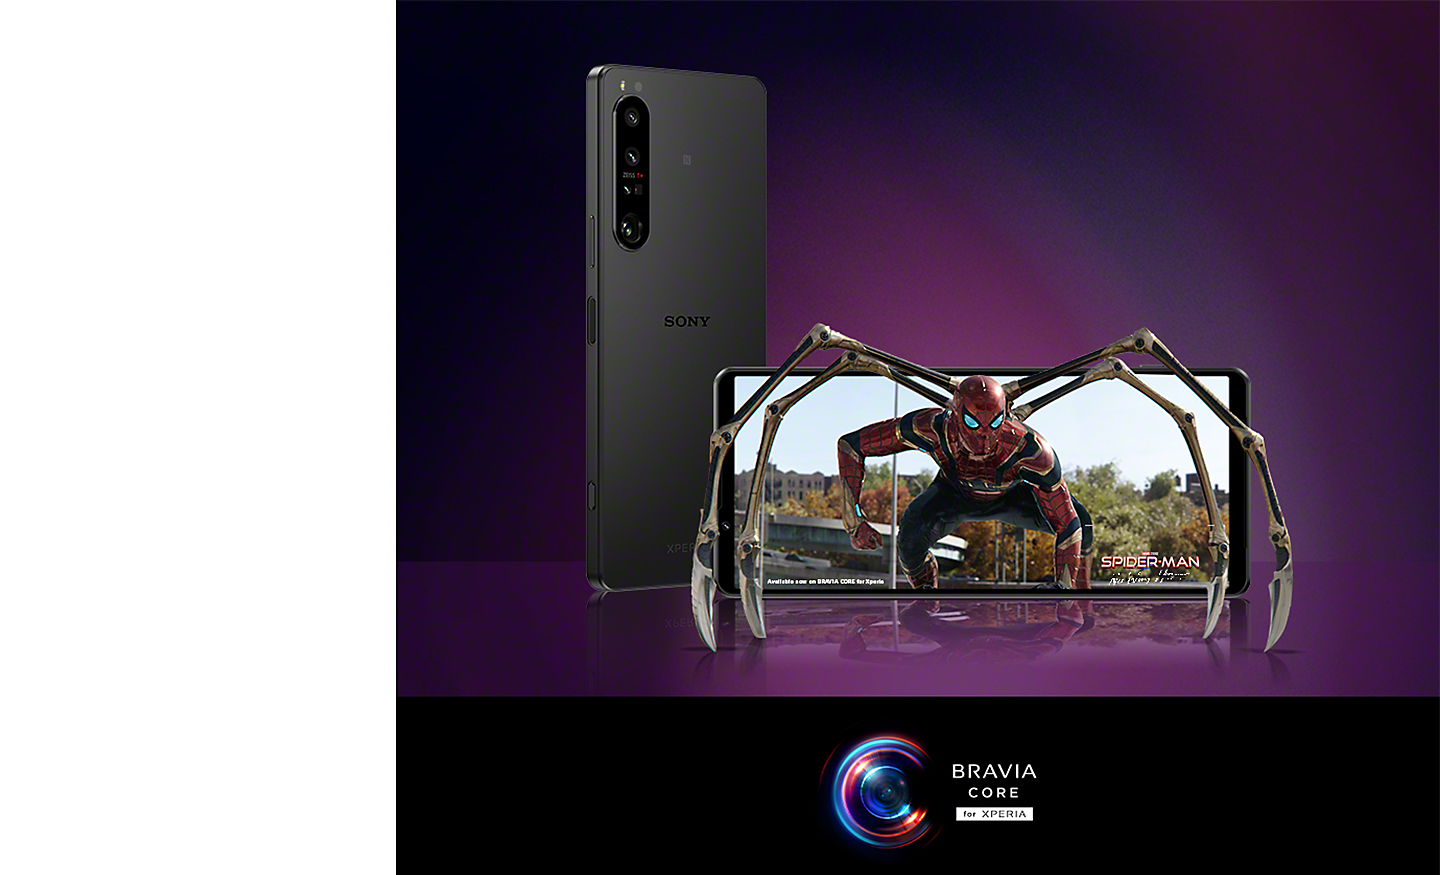 Two Xperia smartphones, one with Spider-Man emerging from the display and the logos for Spider-Man: No Way Home and BRAVIA CORE for Xperia